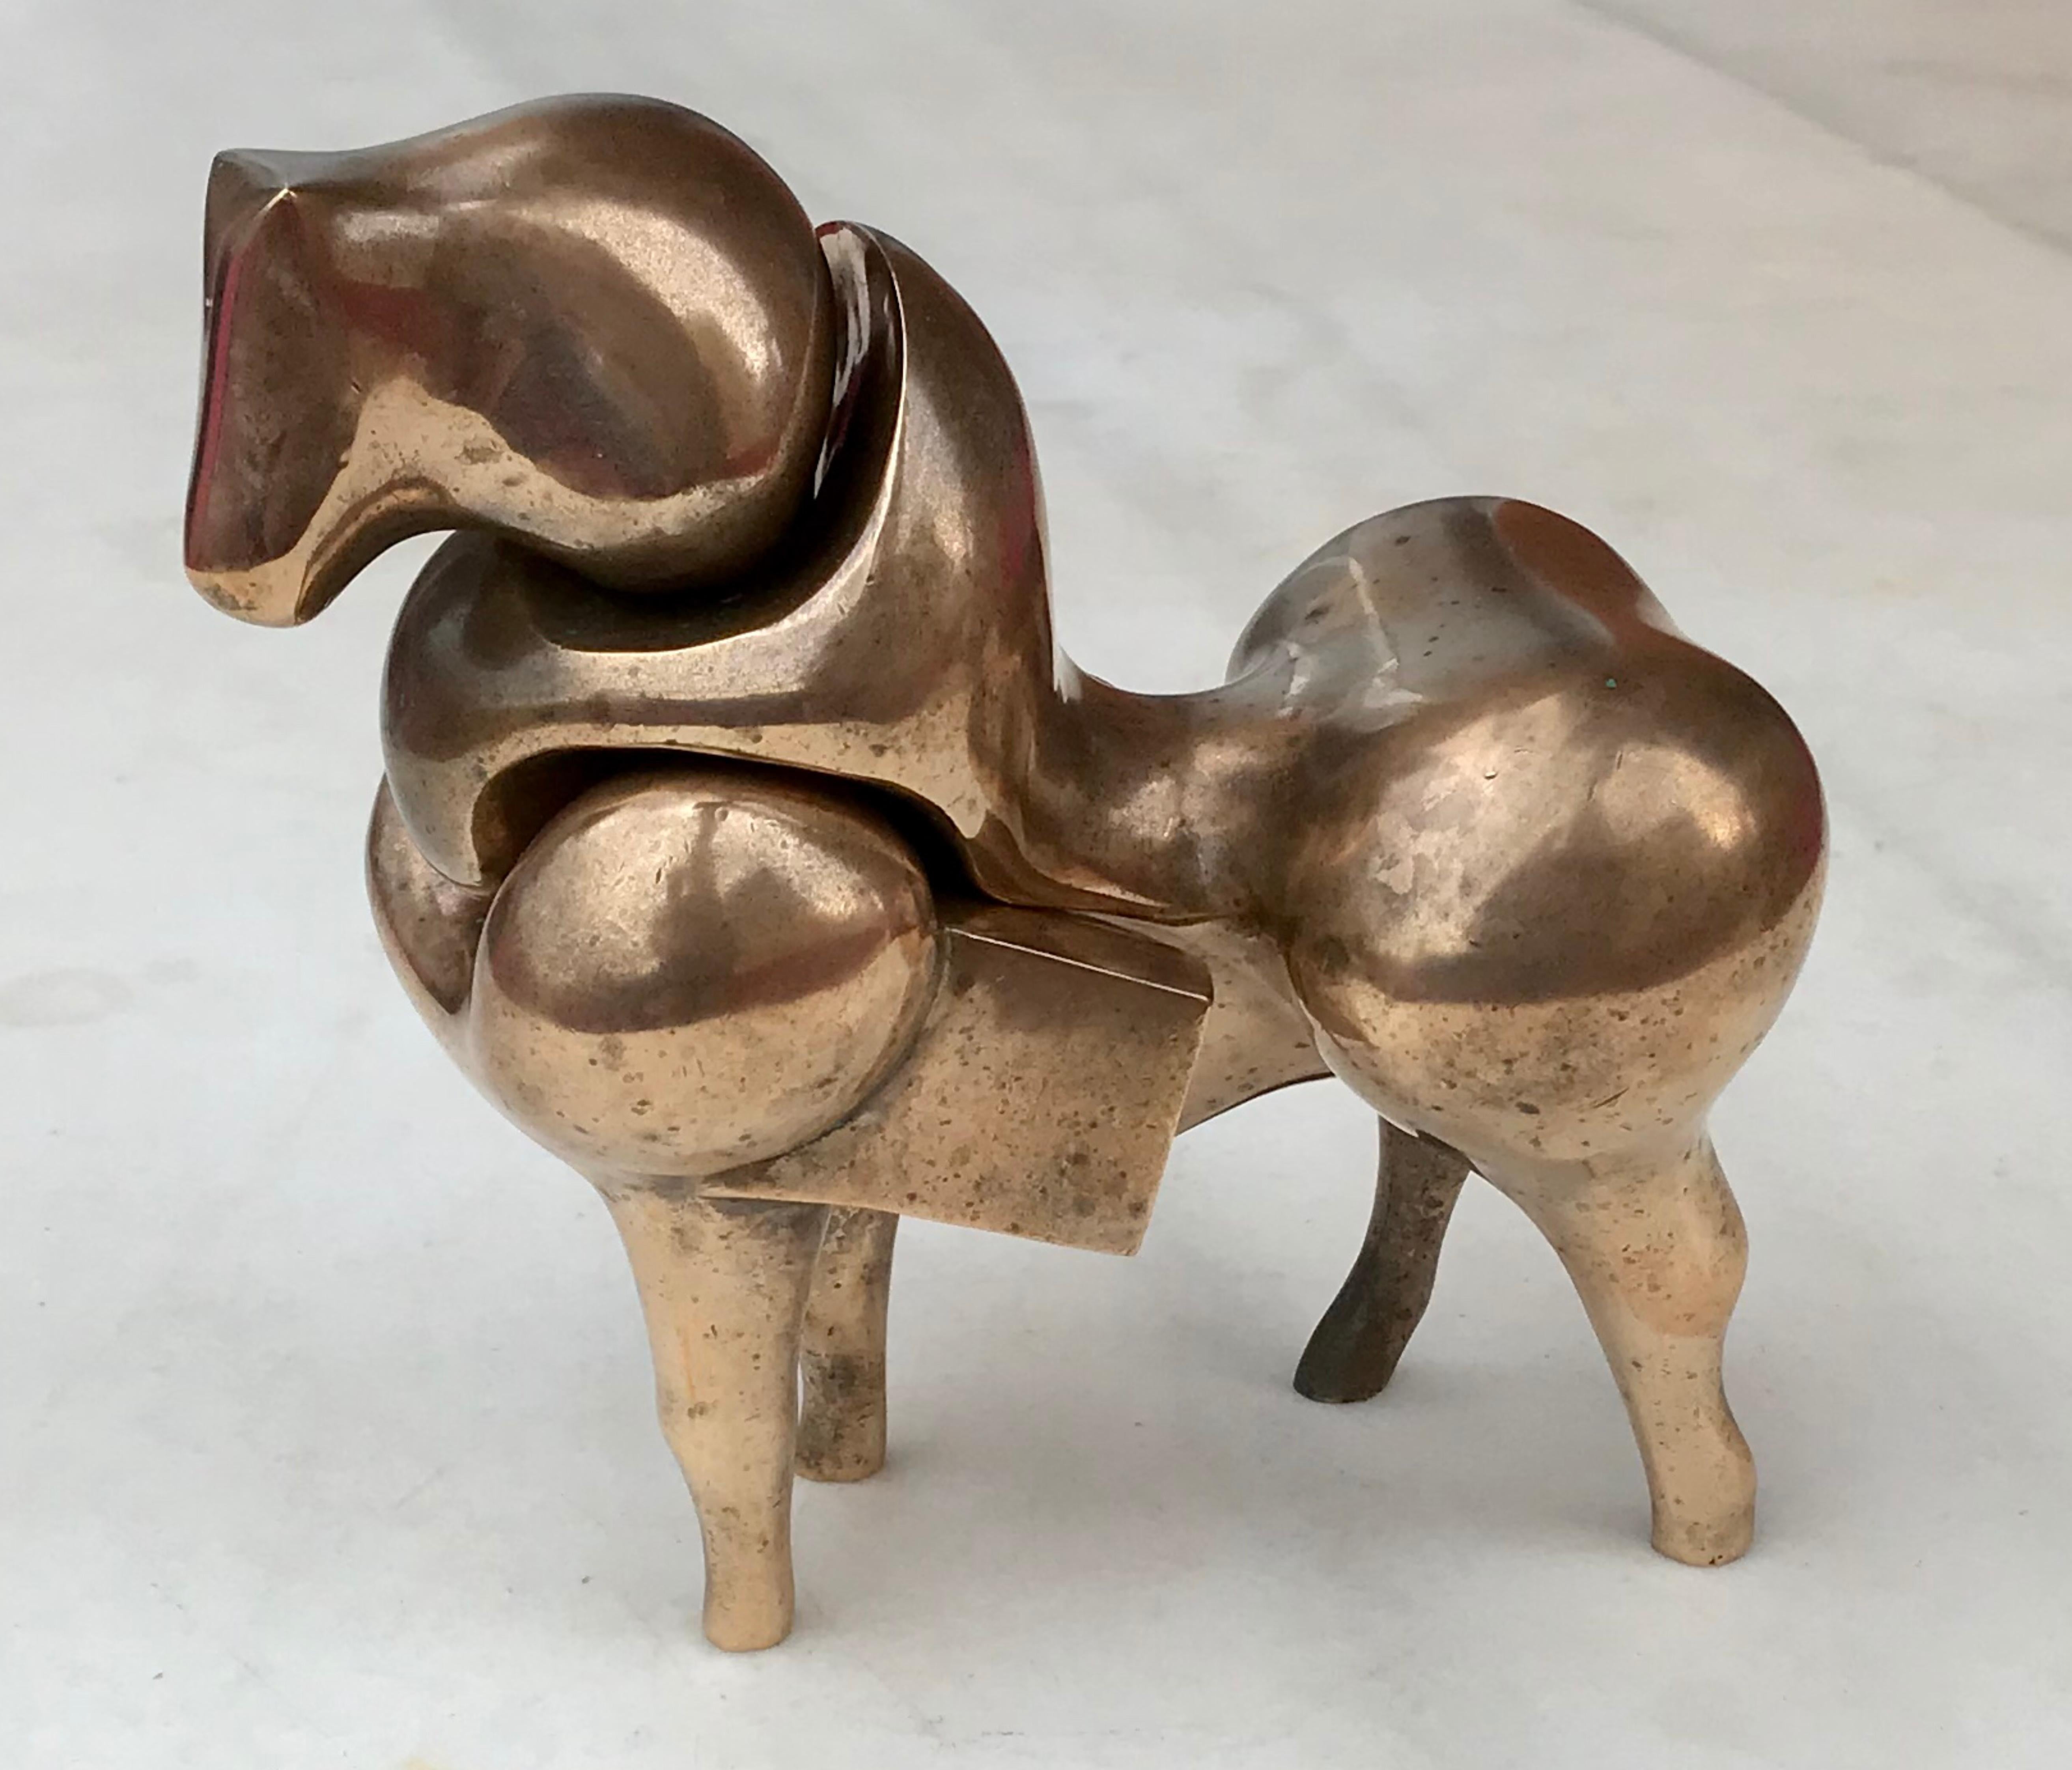 A bronze sculpture of a bull by Francisco Baron, signed and numbered by the artist, this cleverly sculpted piece consists of two parts slid into to each other to resemble a stylized bull.